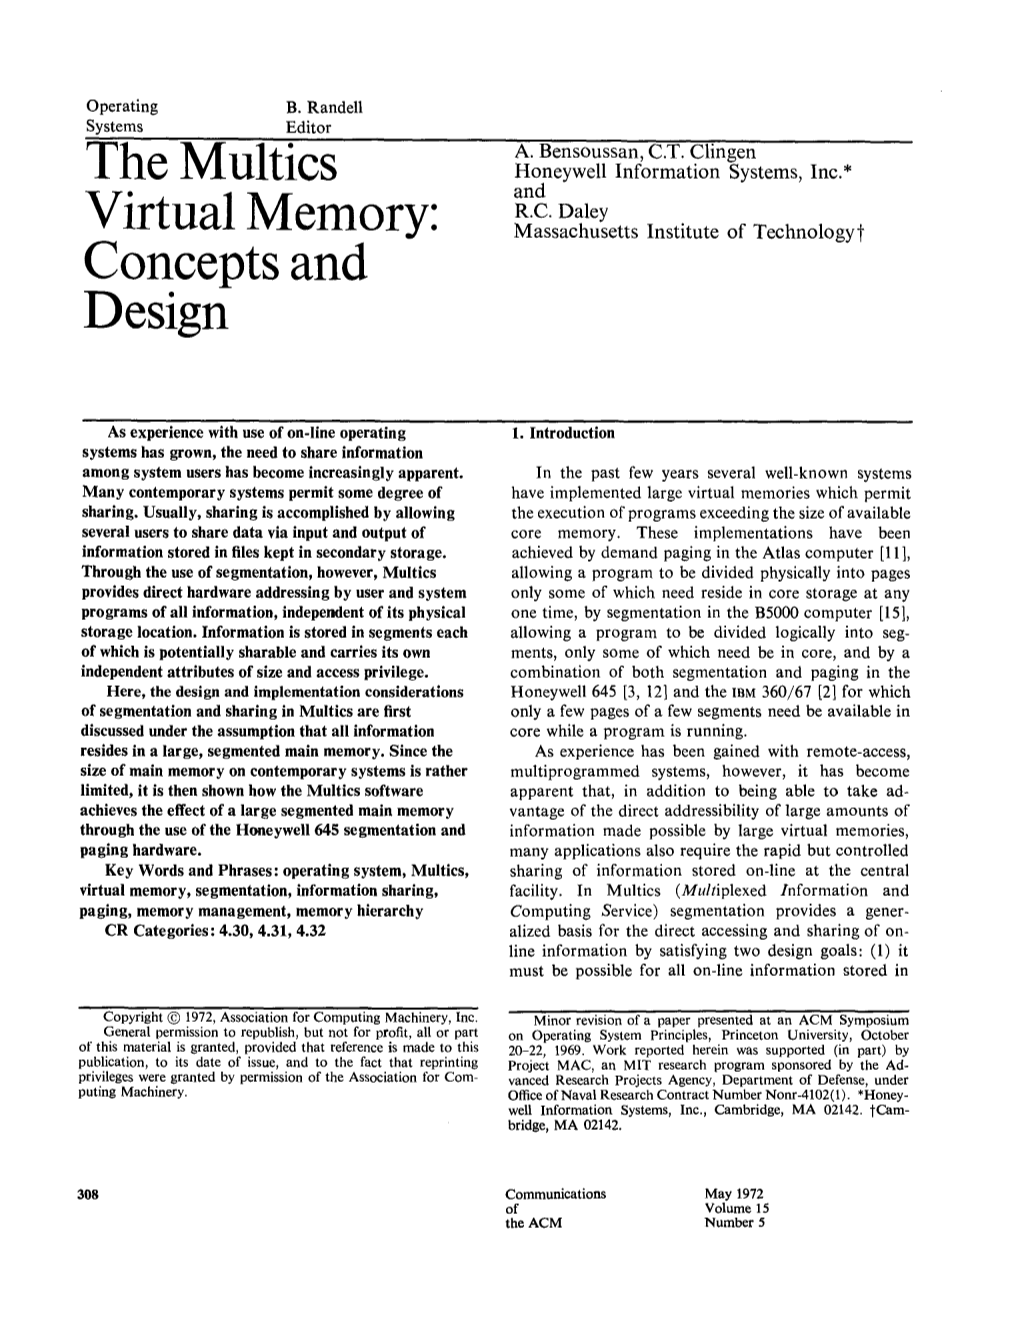 The Multics Virtual Memory: Concepts and Design